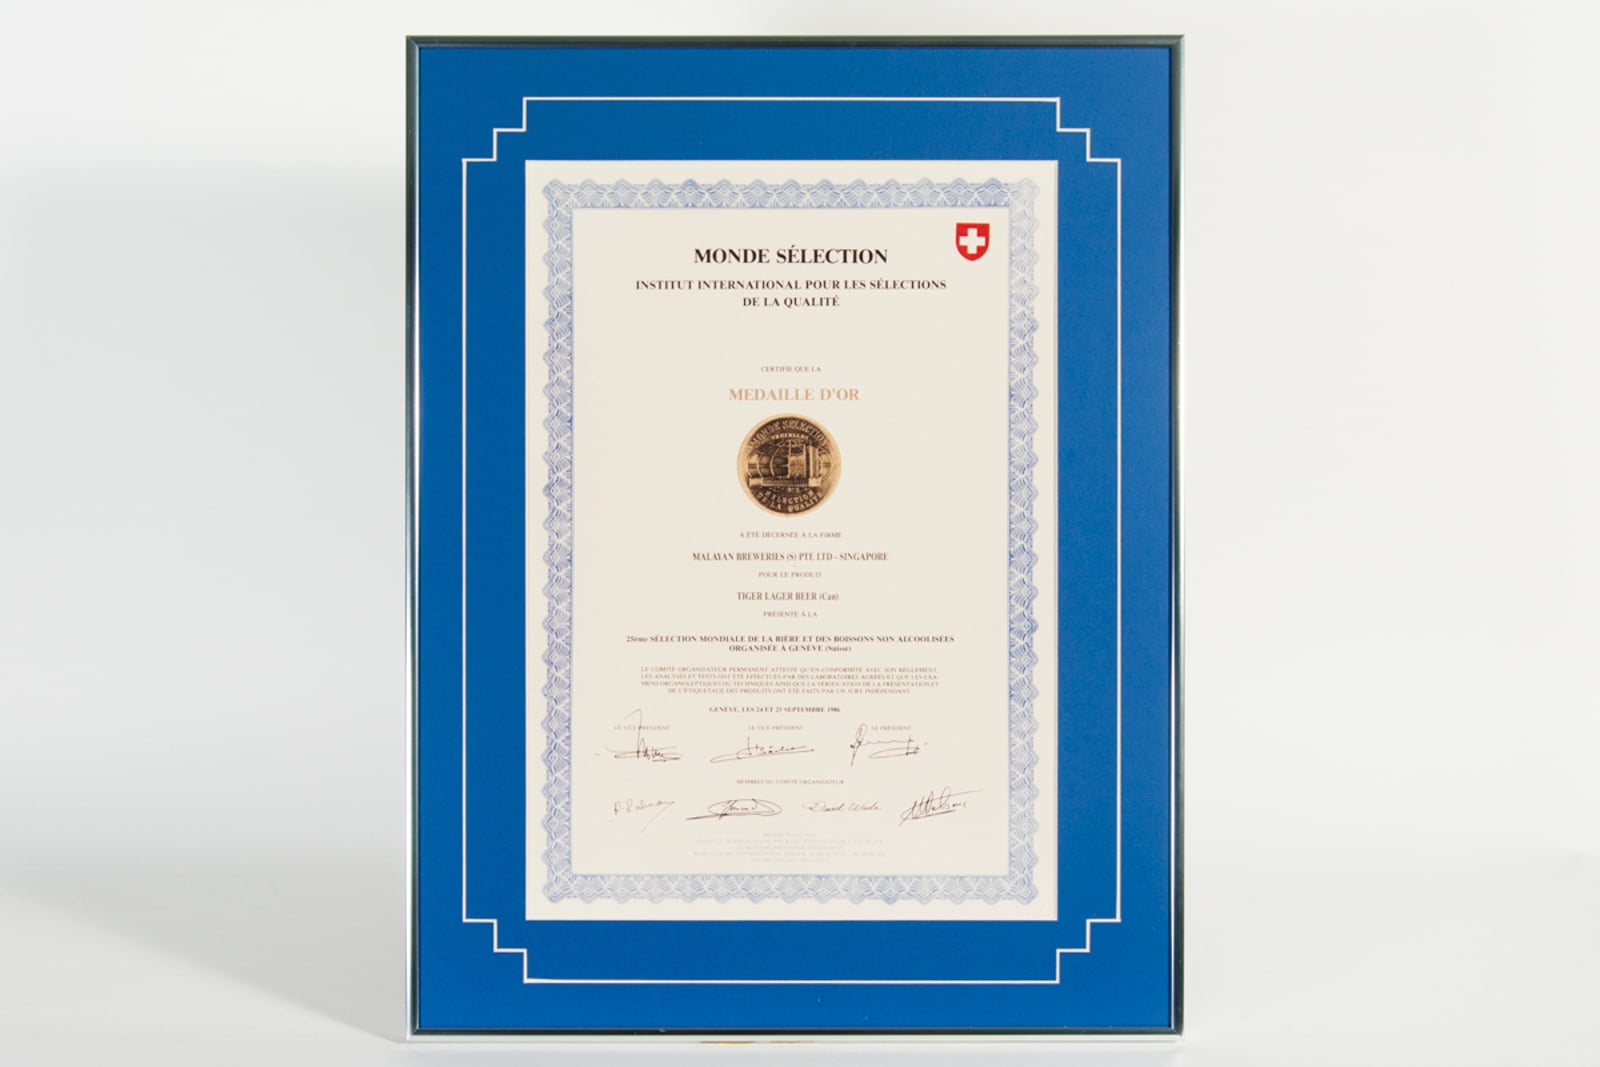 Tiger Lager (Can) Médaille d'Or, Monde Selection Certificate 1986